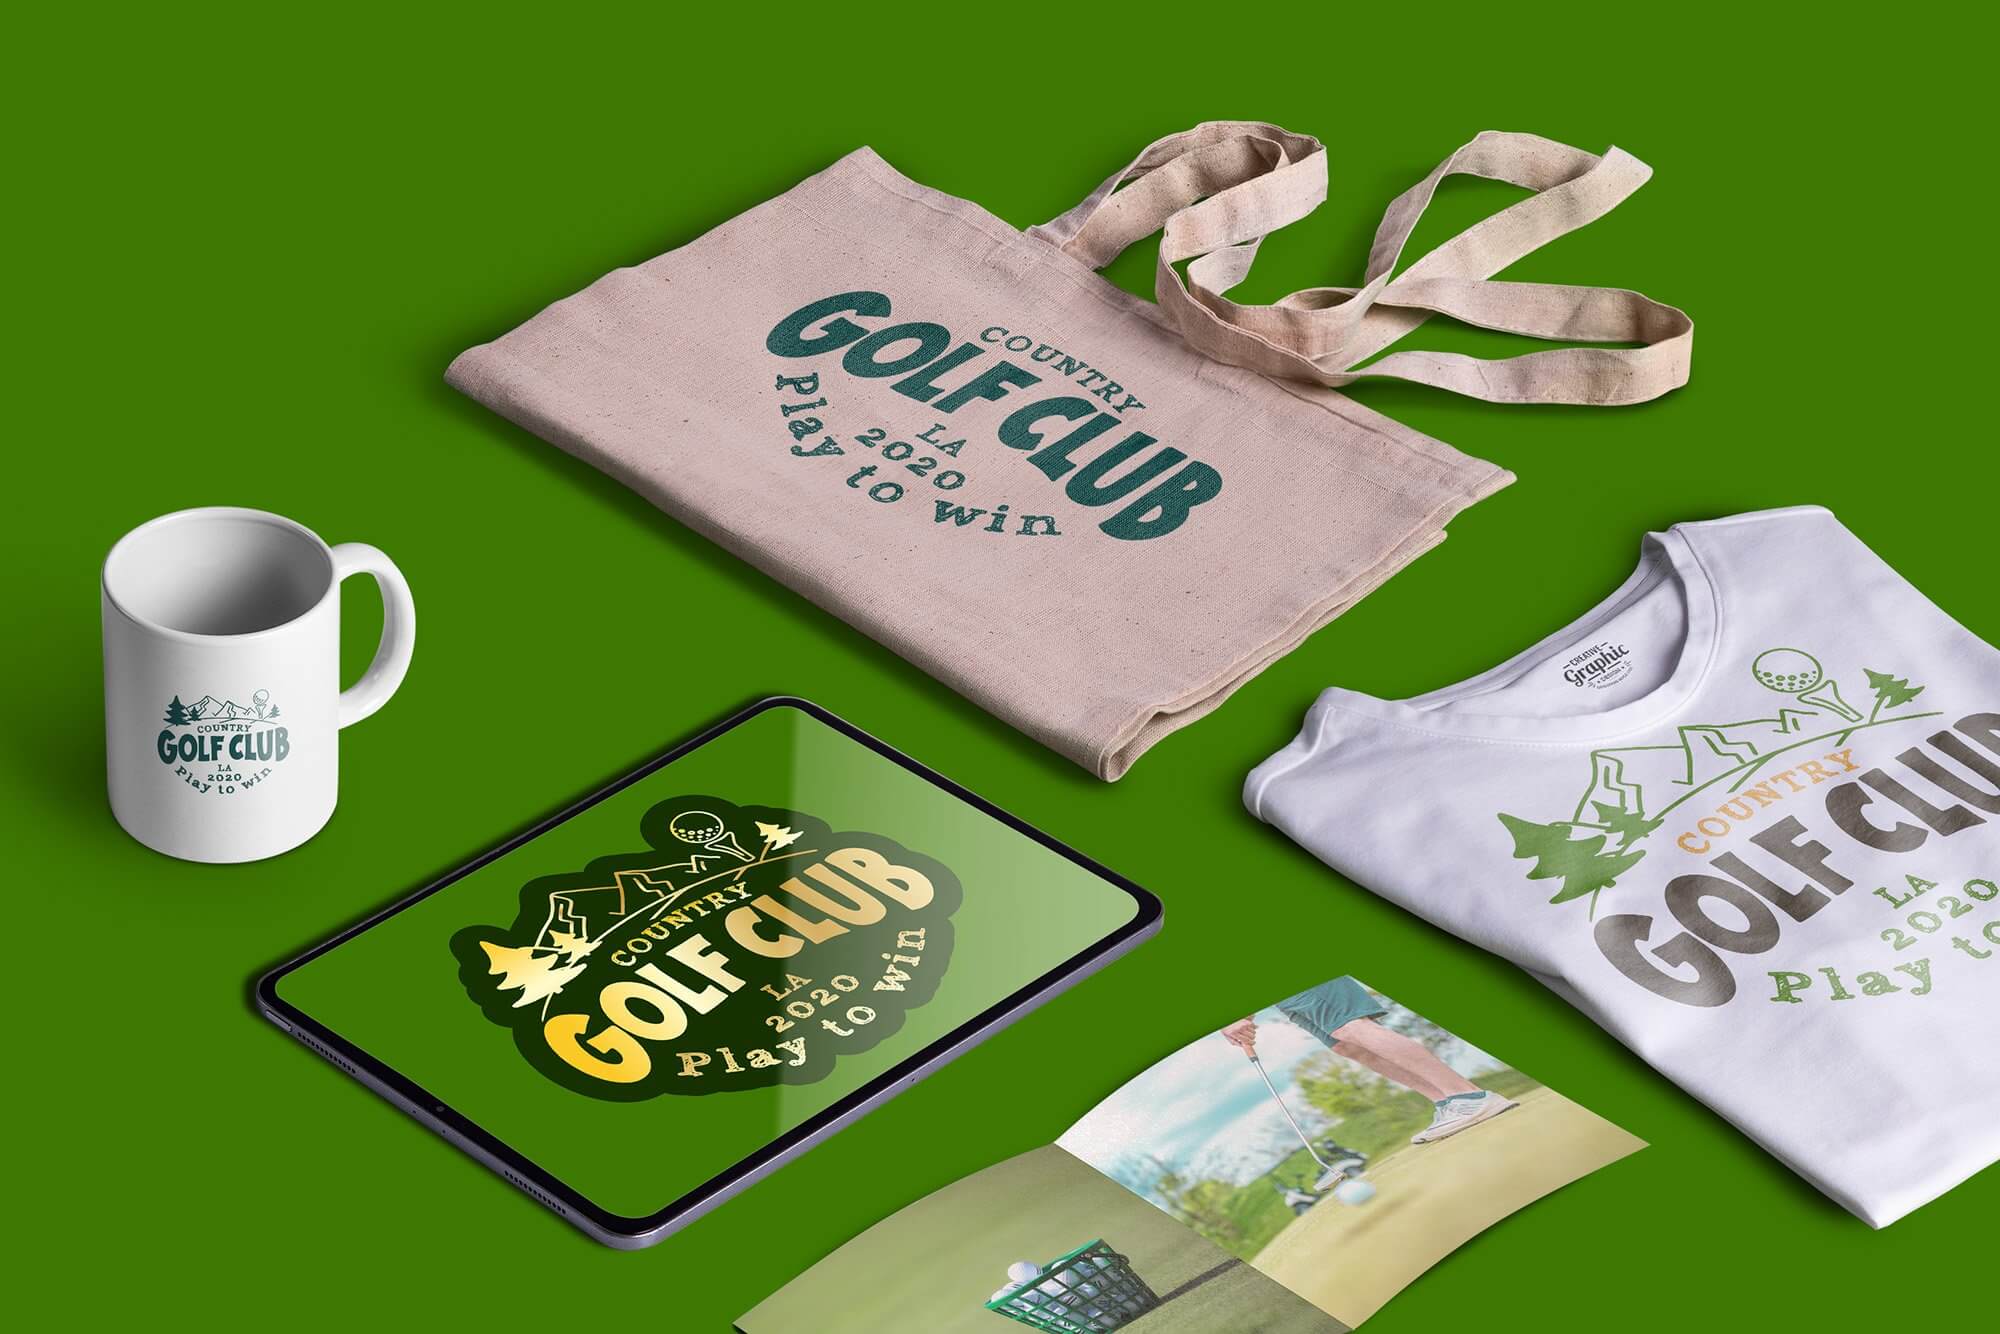 Preview golf bundle on the table and casual things.